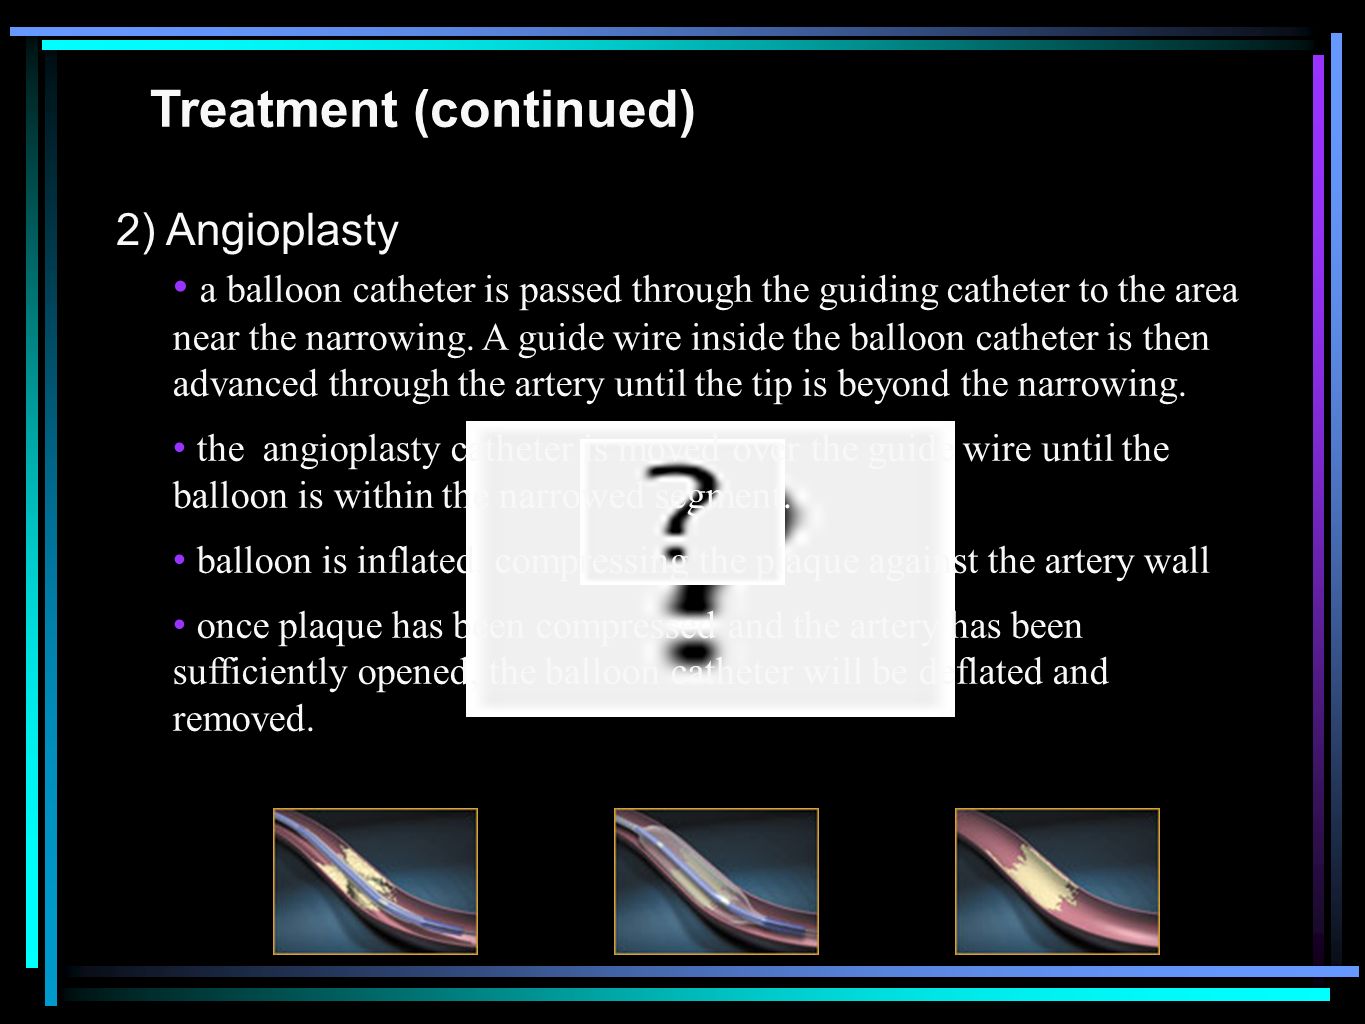 Treatment (continued) 2) Angioplasty a balloon catheter is passed through the guiding catheter to the area near the narrowing.